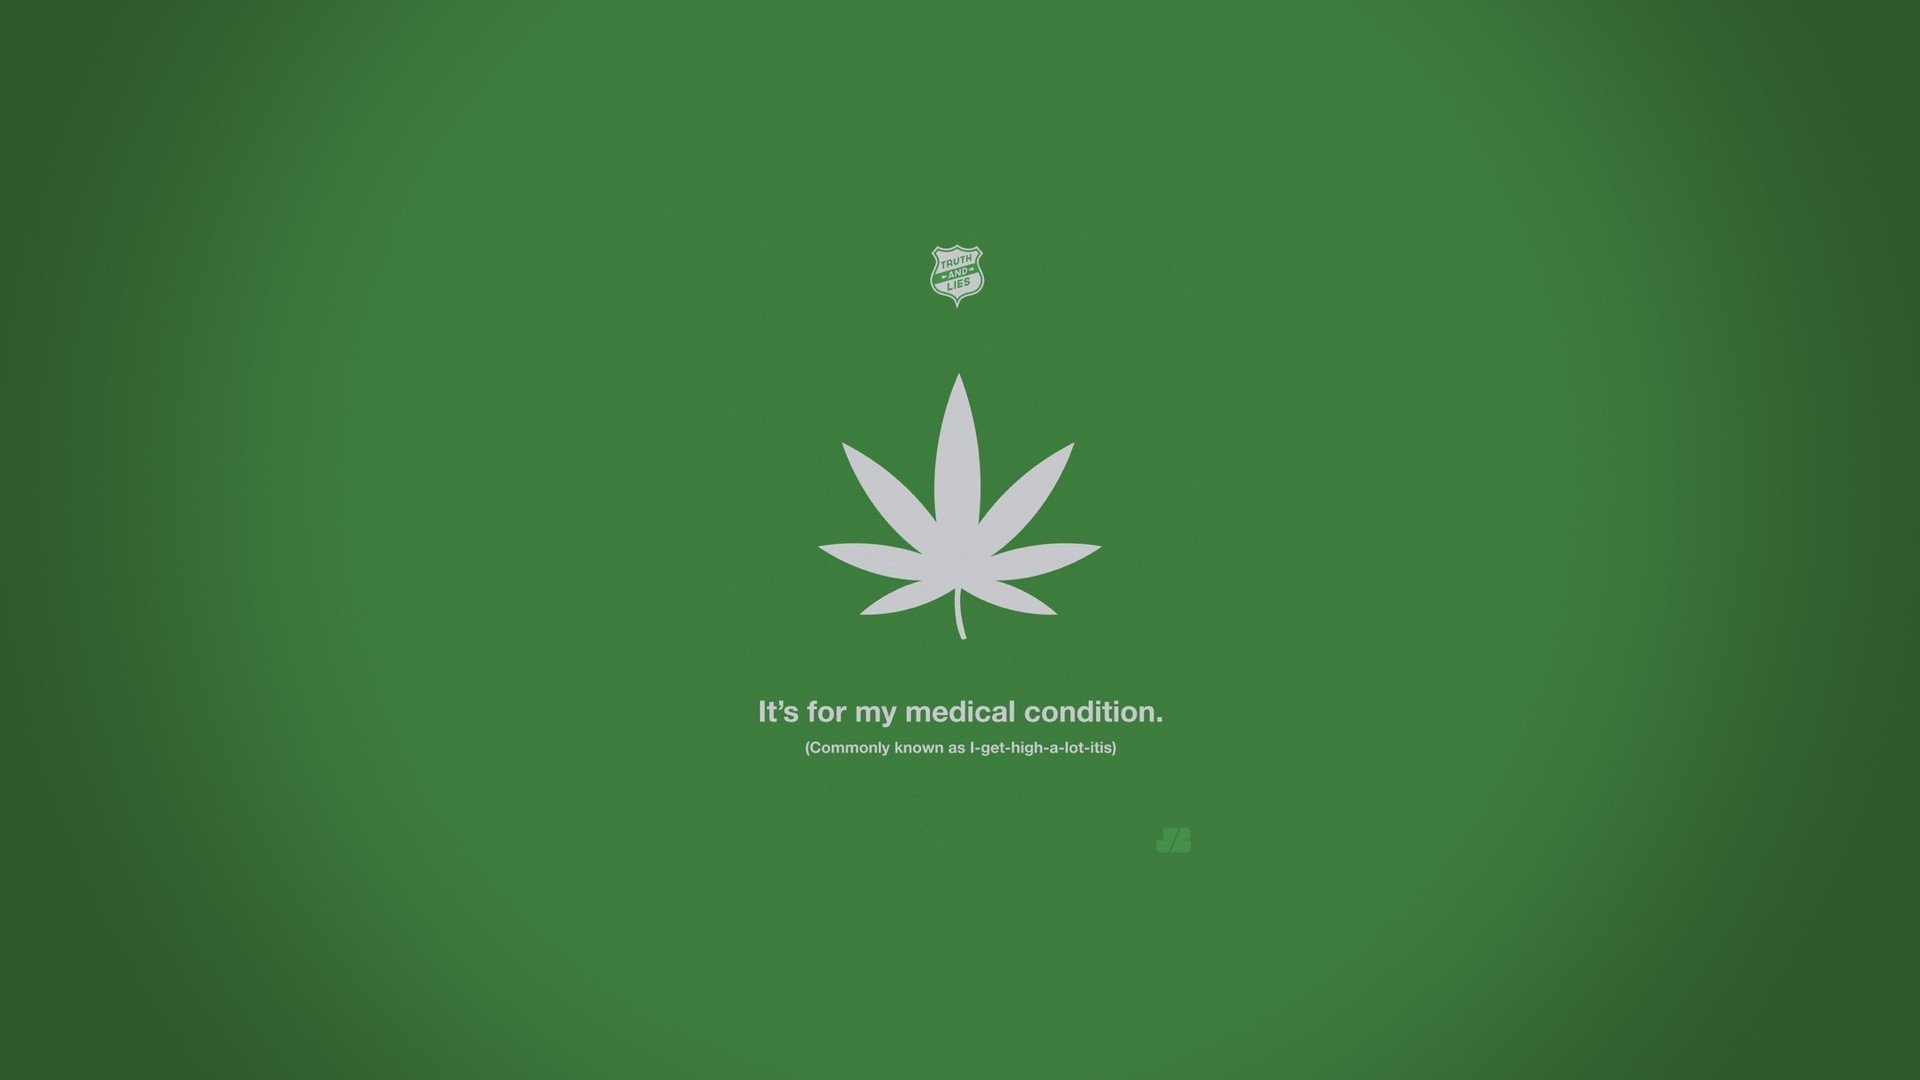 General 1920x1080 minimalism cannabis drugs simple background green background plants leaves